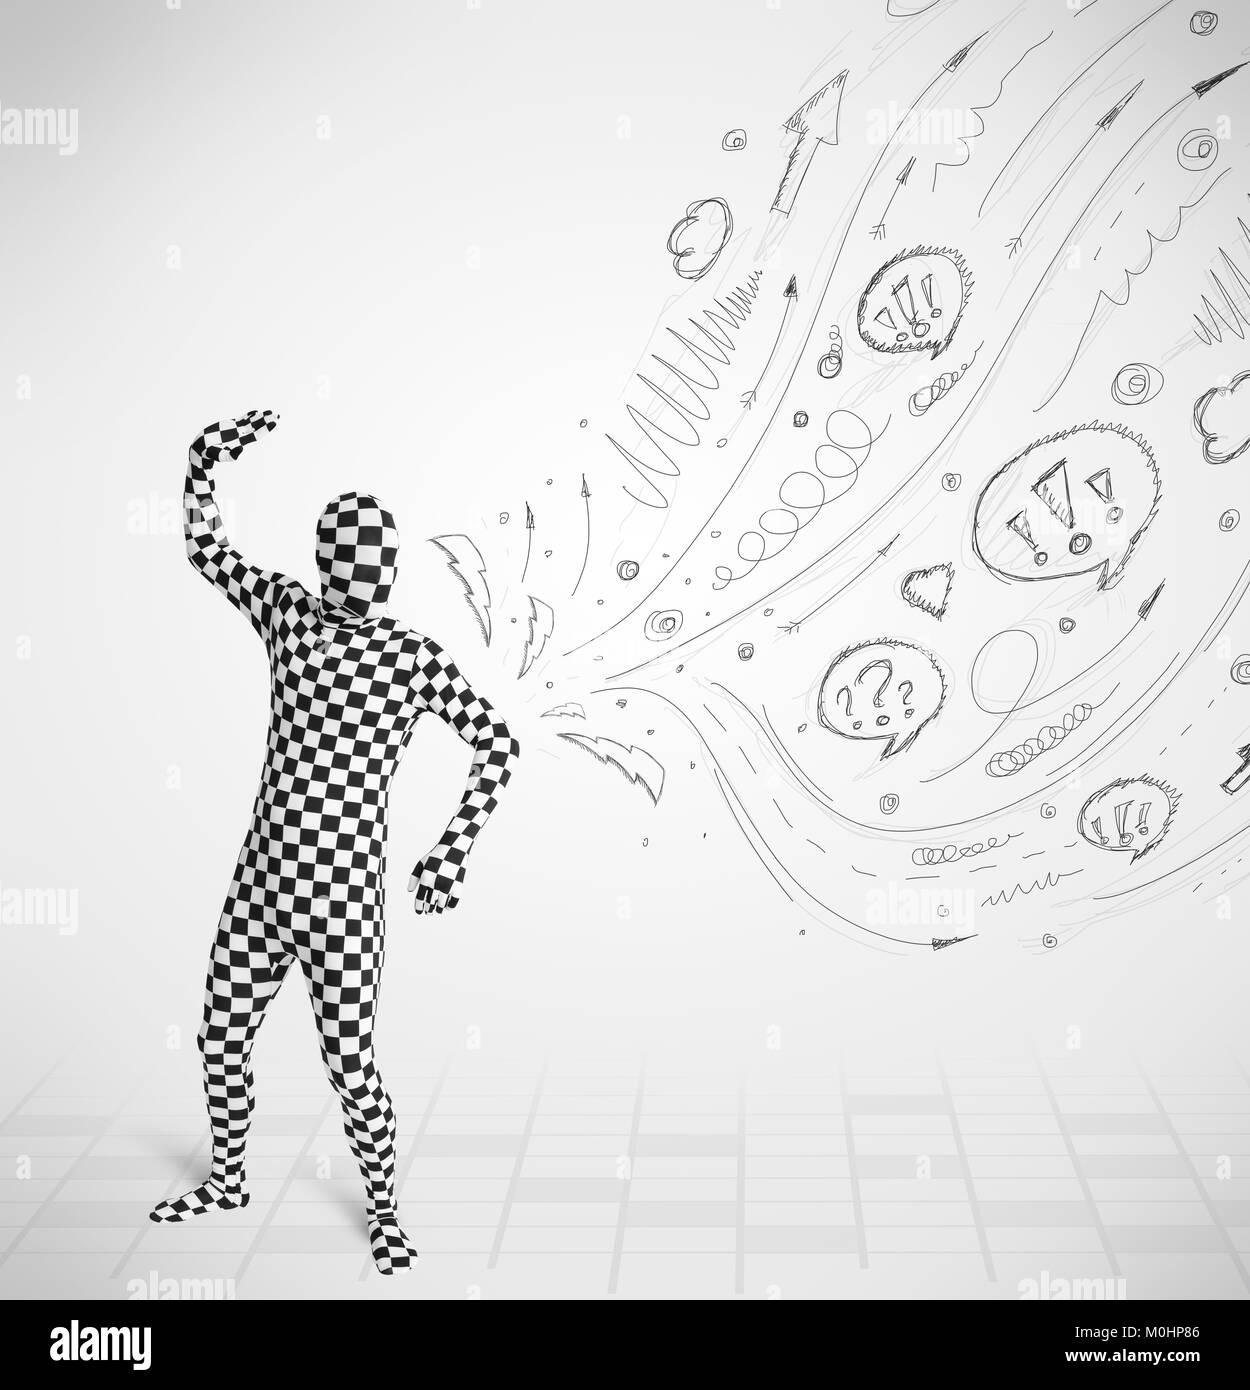 Funny guy in body suit morphsuit looking at sketches and doodles Stock Photo